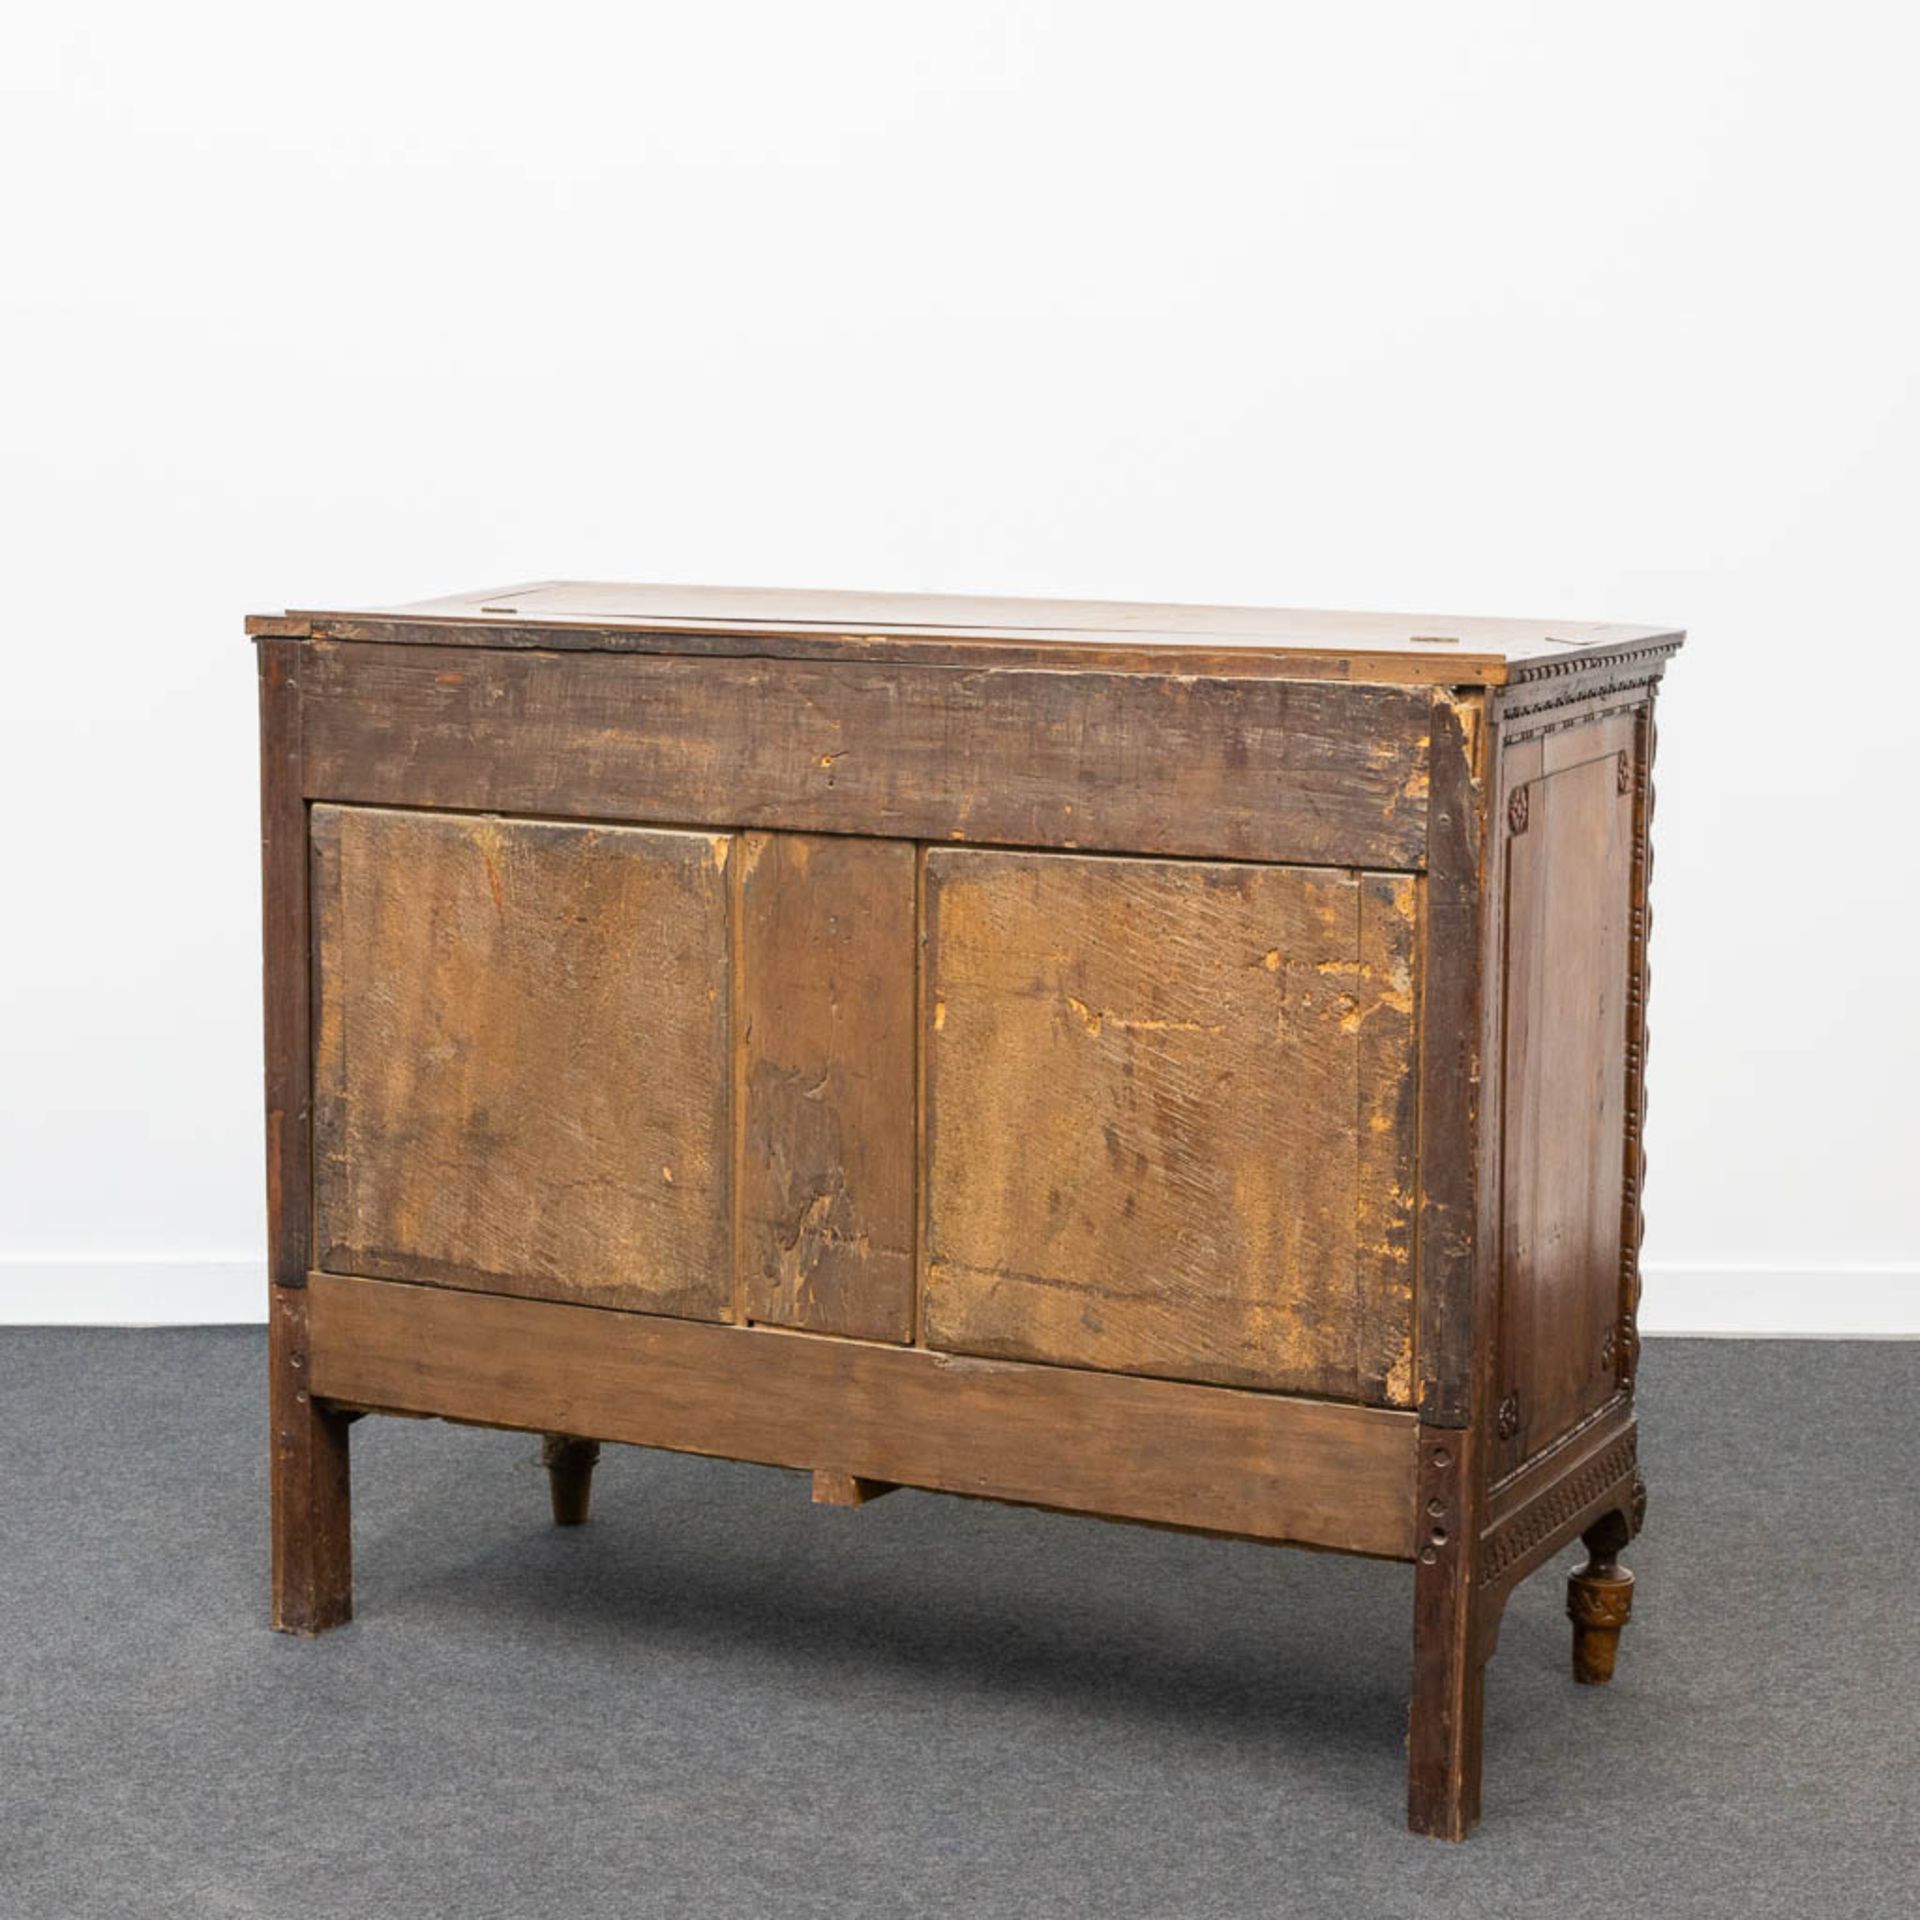 A wood sculptured commode in Louis XVI style, with 3 drawers and a hidden desk. 18th century. - Bild 4 aus 23